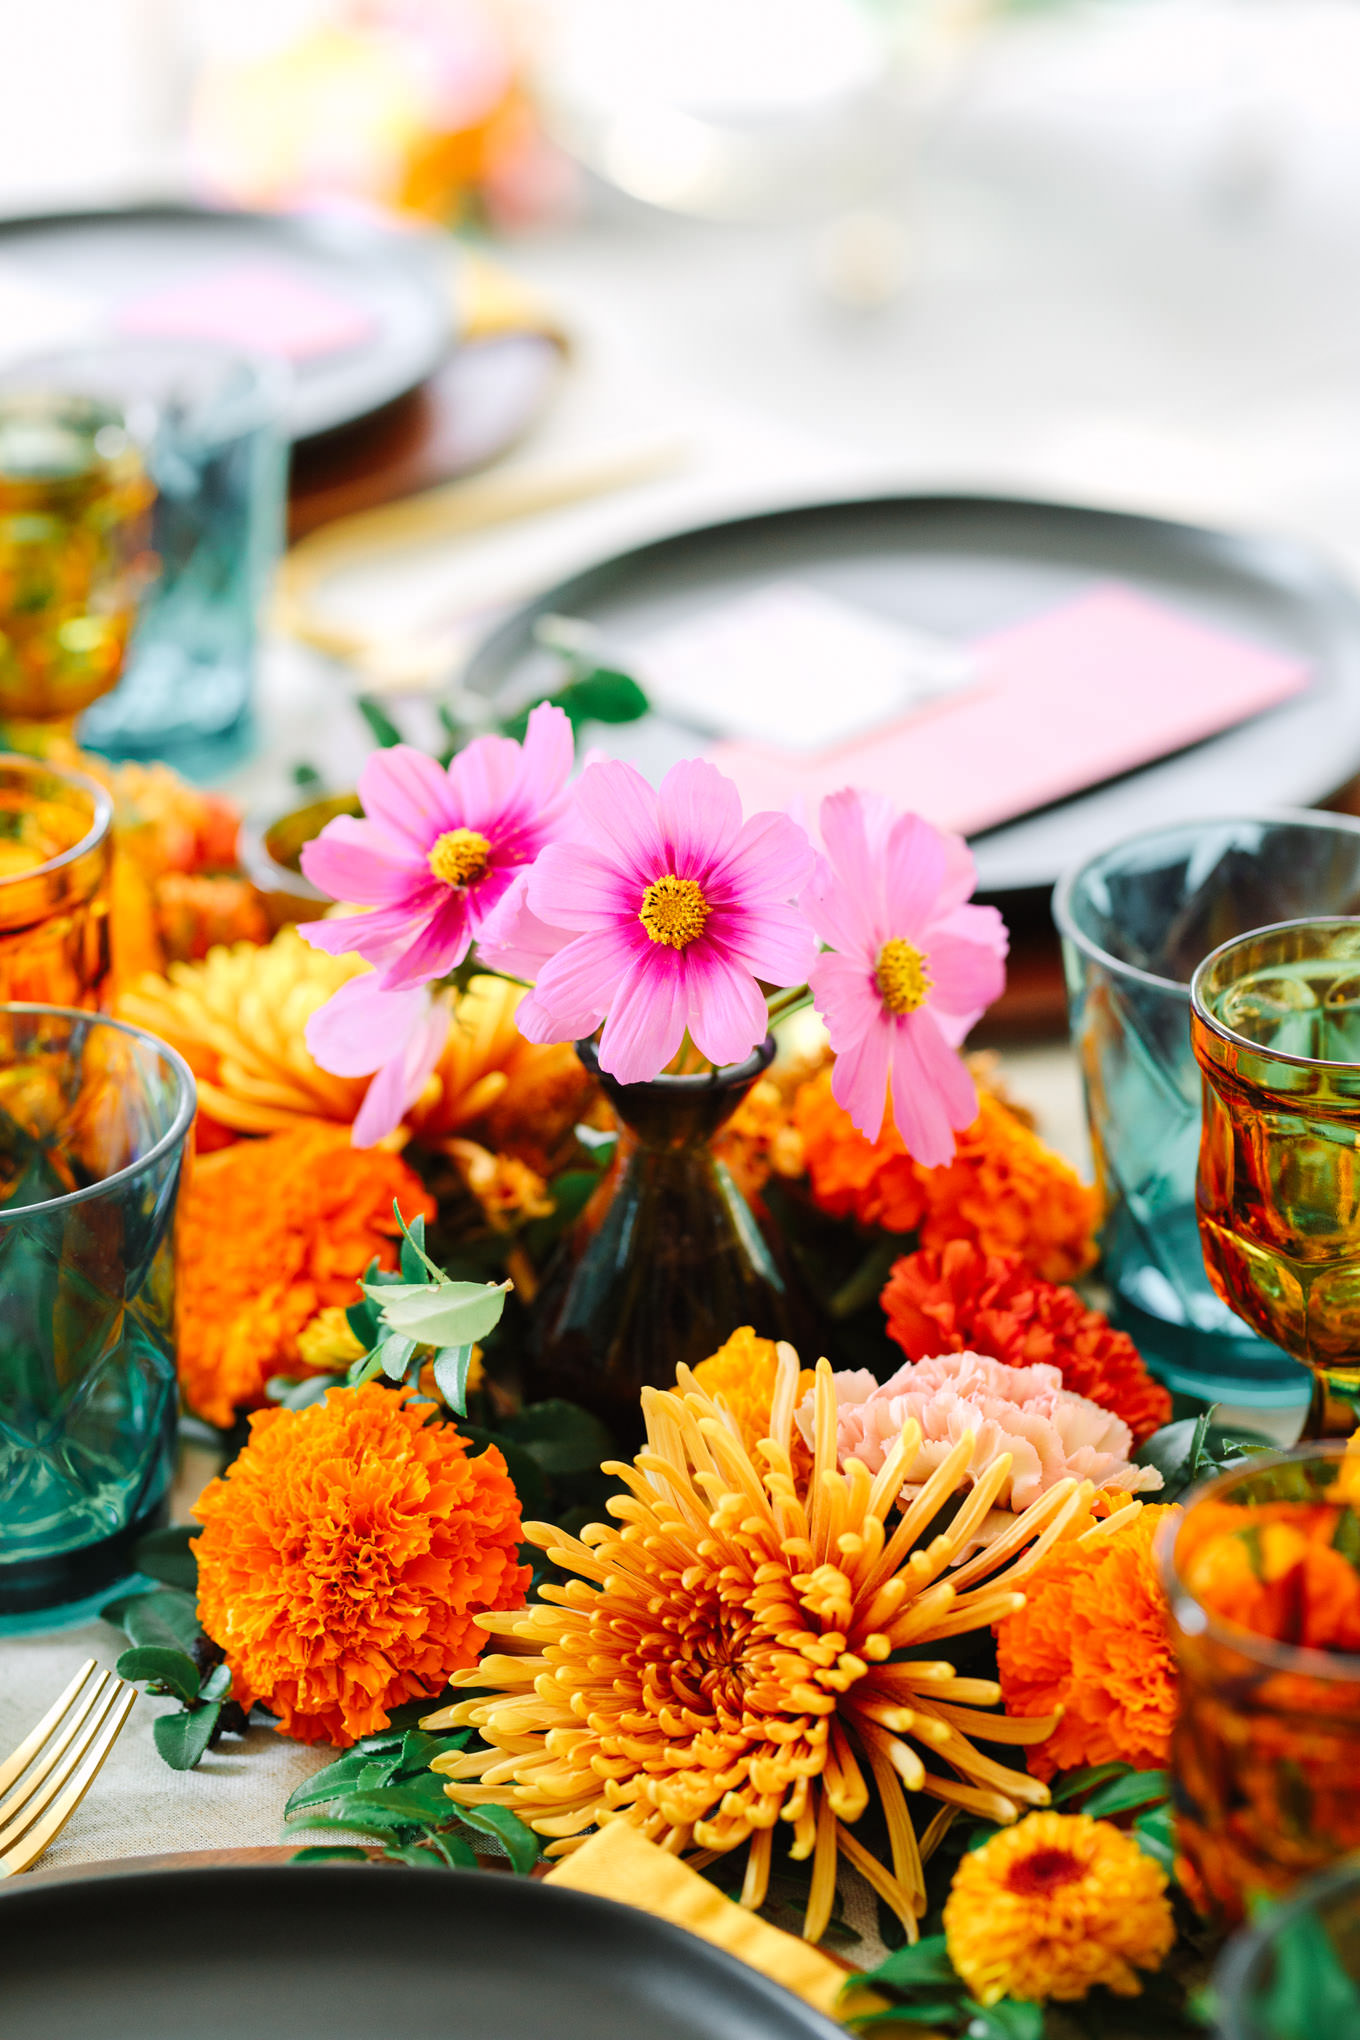 Stunning bold and bright floral arrangements on table for wedding reception | Vibrant backyard micro wedding featured on Green Wedding Shoes | Colorful LA wedding photography | #losangeleswedding #backyardwedding #microwedding #laweddingphotographer Source: Mary Costa Photography | Los Angeles